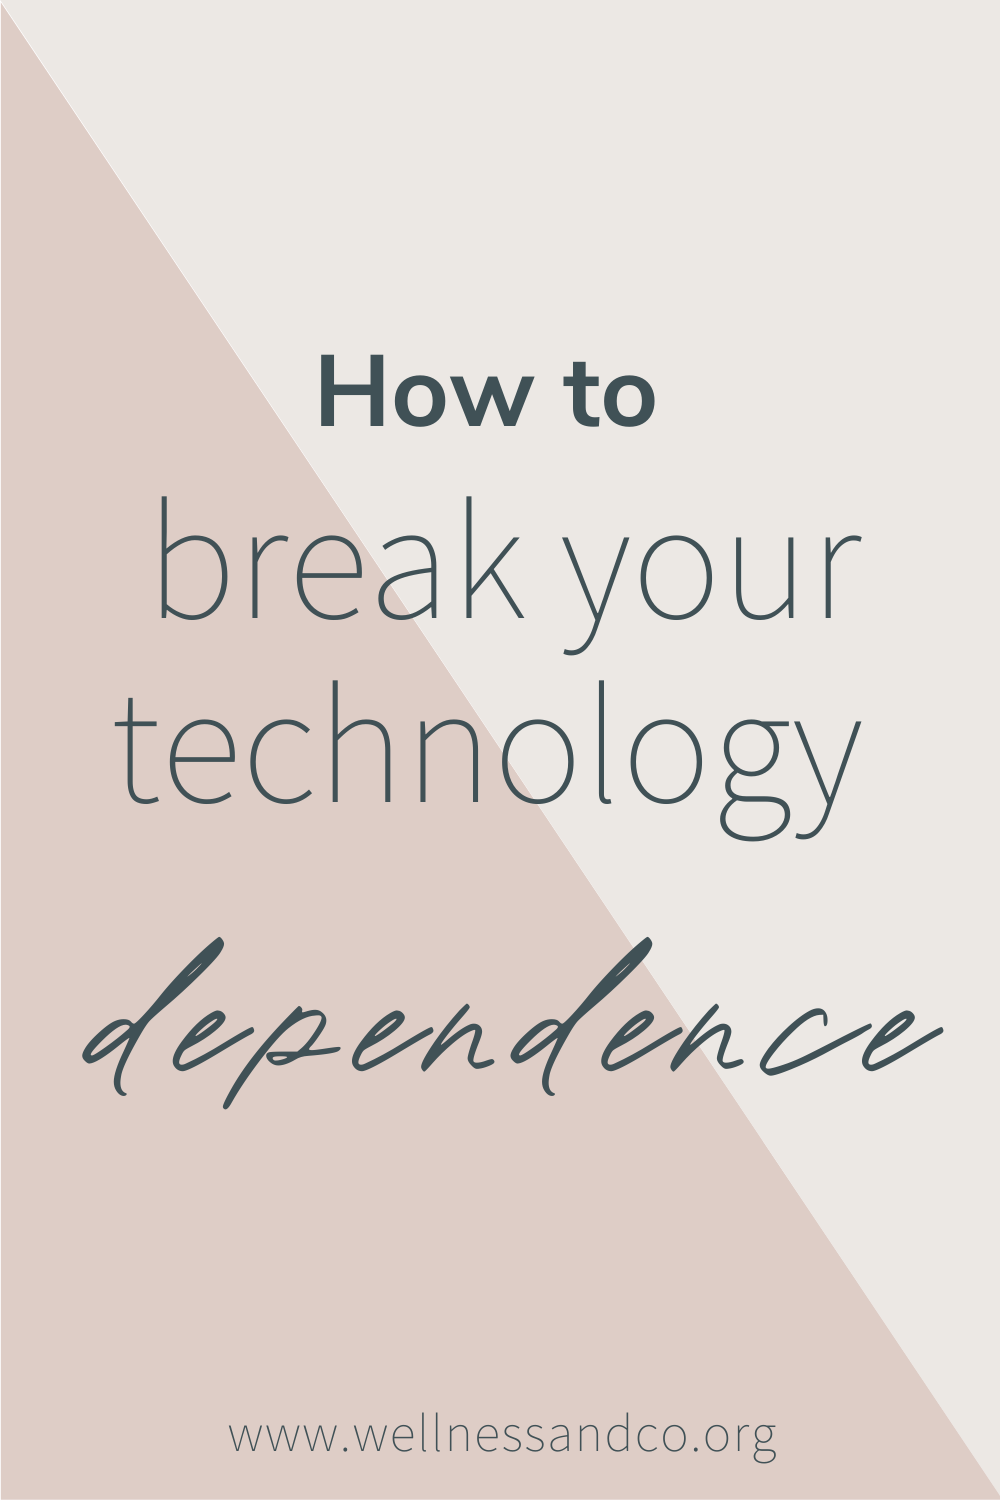 How to Break Your Technology Dependence | Do you scroll aimlessly through social media? Are you constantly on Instagram? Struggling to break free from your technology addiction? Check out this post to learn how to break your technology dependence, cheers!